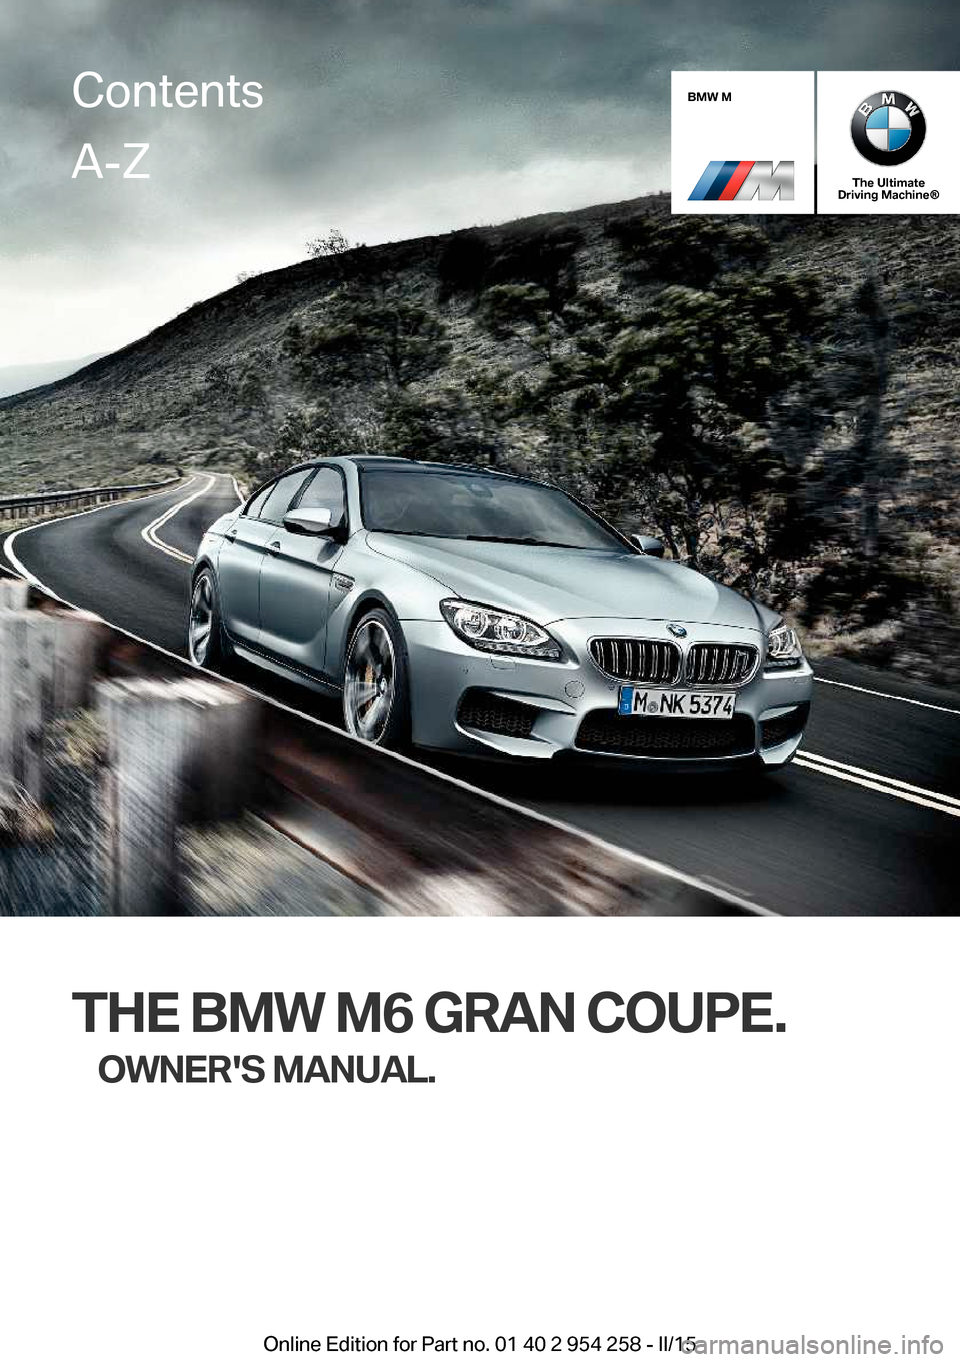 BMW M6 GRAN COUPE 2015 F06M Owners Manual BMW M
The Ultimate
Driving Machine®
THE BMW M6 GRAN COUPE.
OWNERS MANUAL.
ContentsA-Z
Online Edition for Part no. 01 40 2 954 258 - II/15   